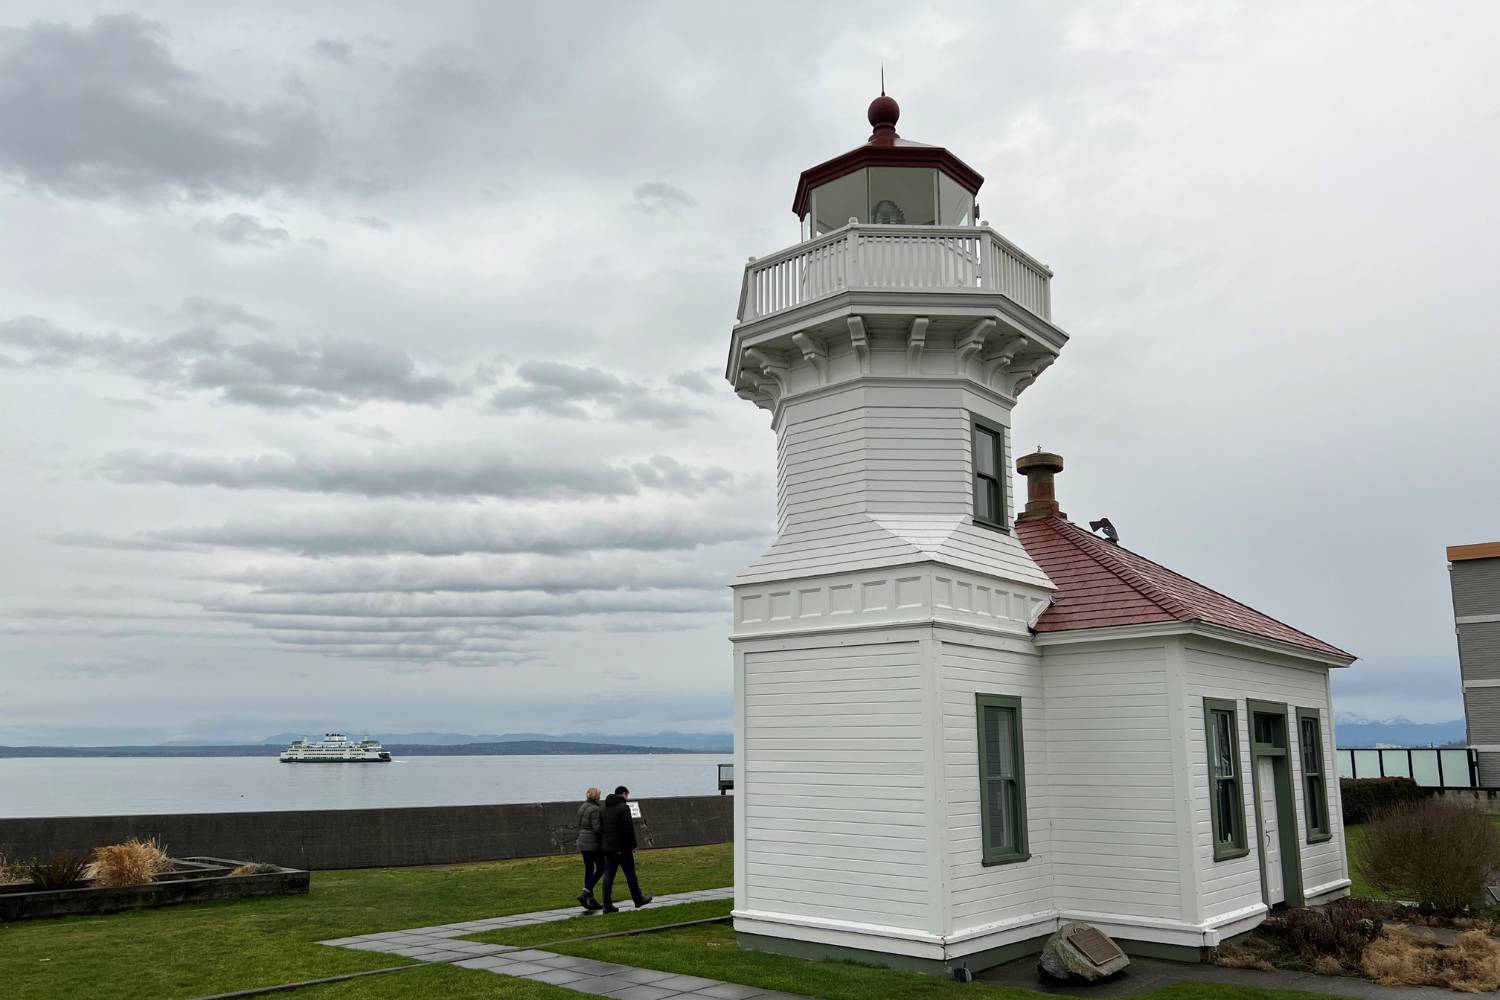 The lighthouse at Mukilteo Lighthouse Park in Mukilteo. A ferry sails in the distance.